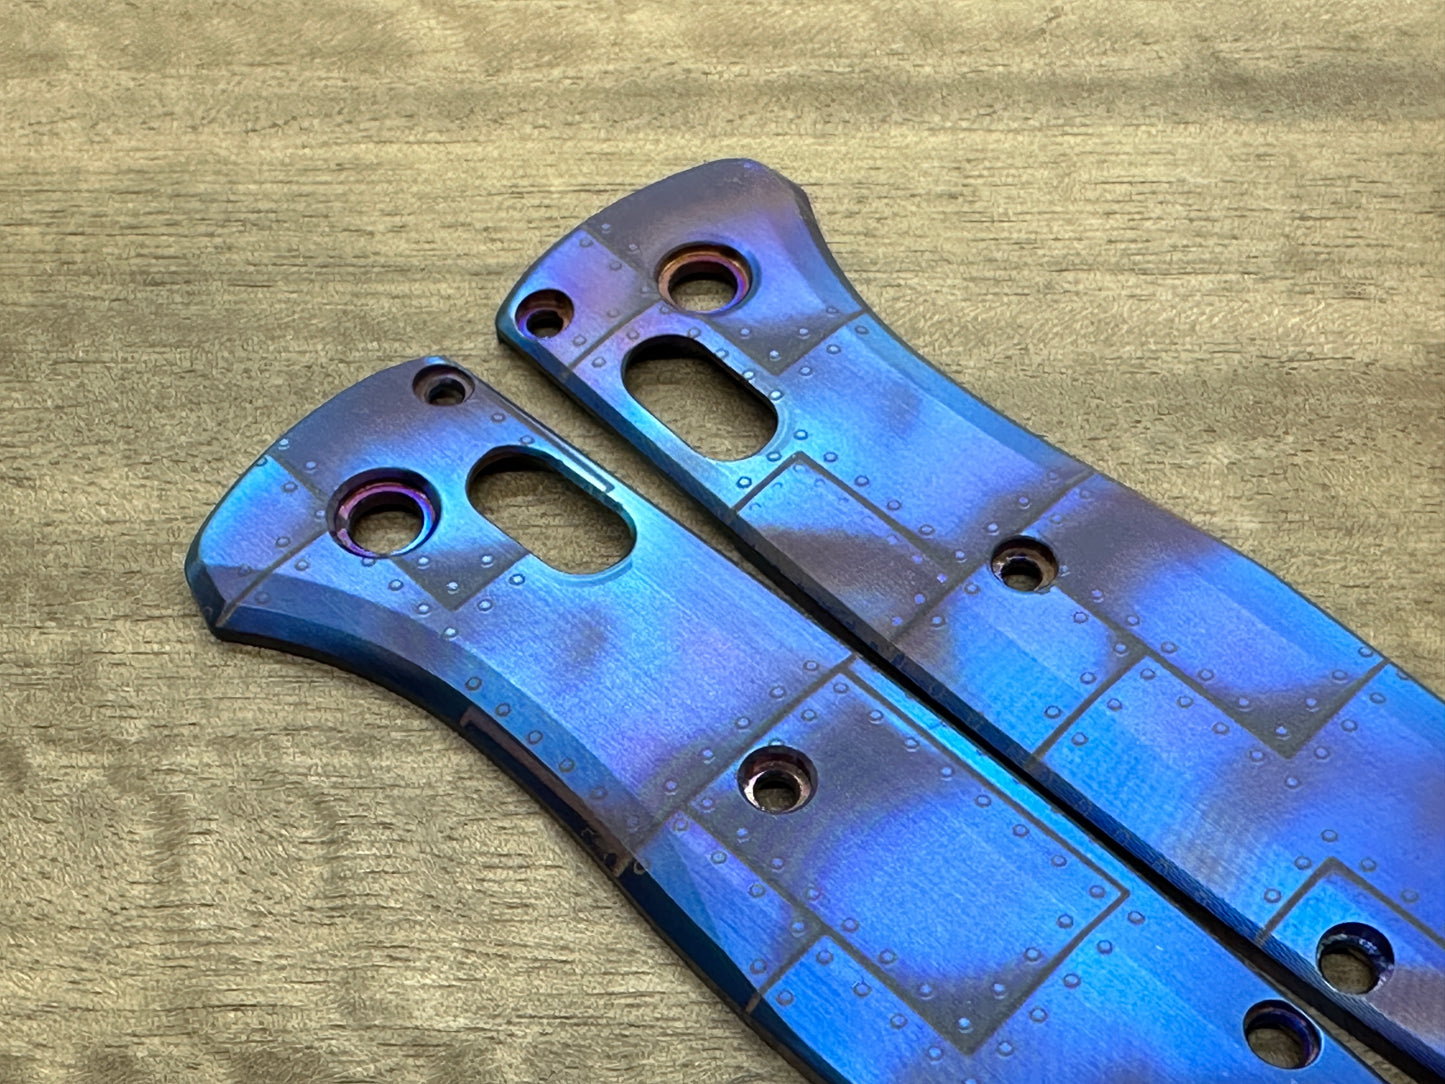 RIVETED AIRPLANE Flamed Titanium Scales for Benchmade Bugout 535